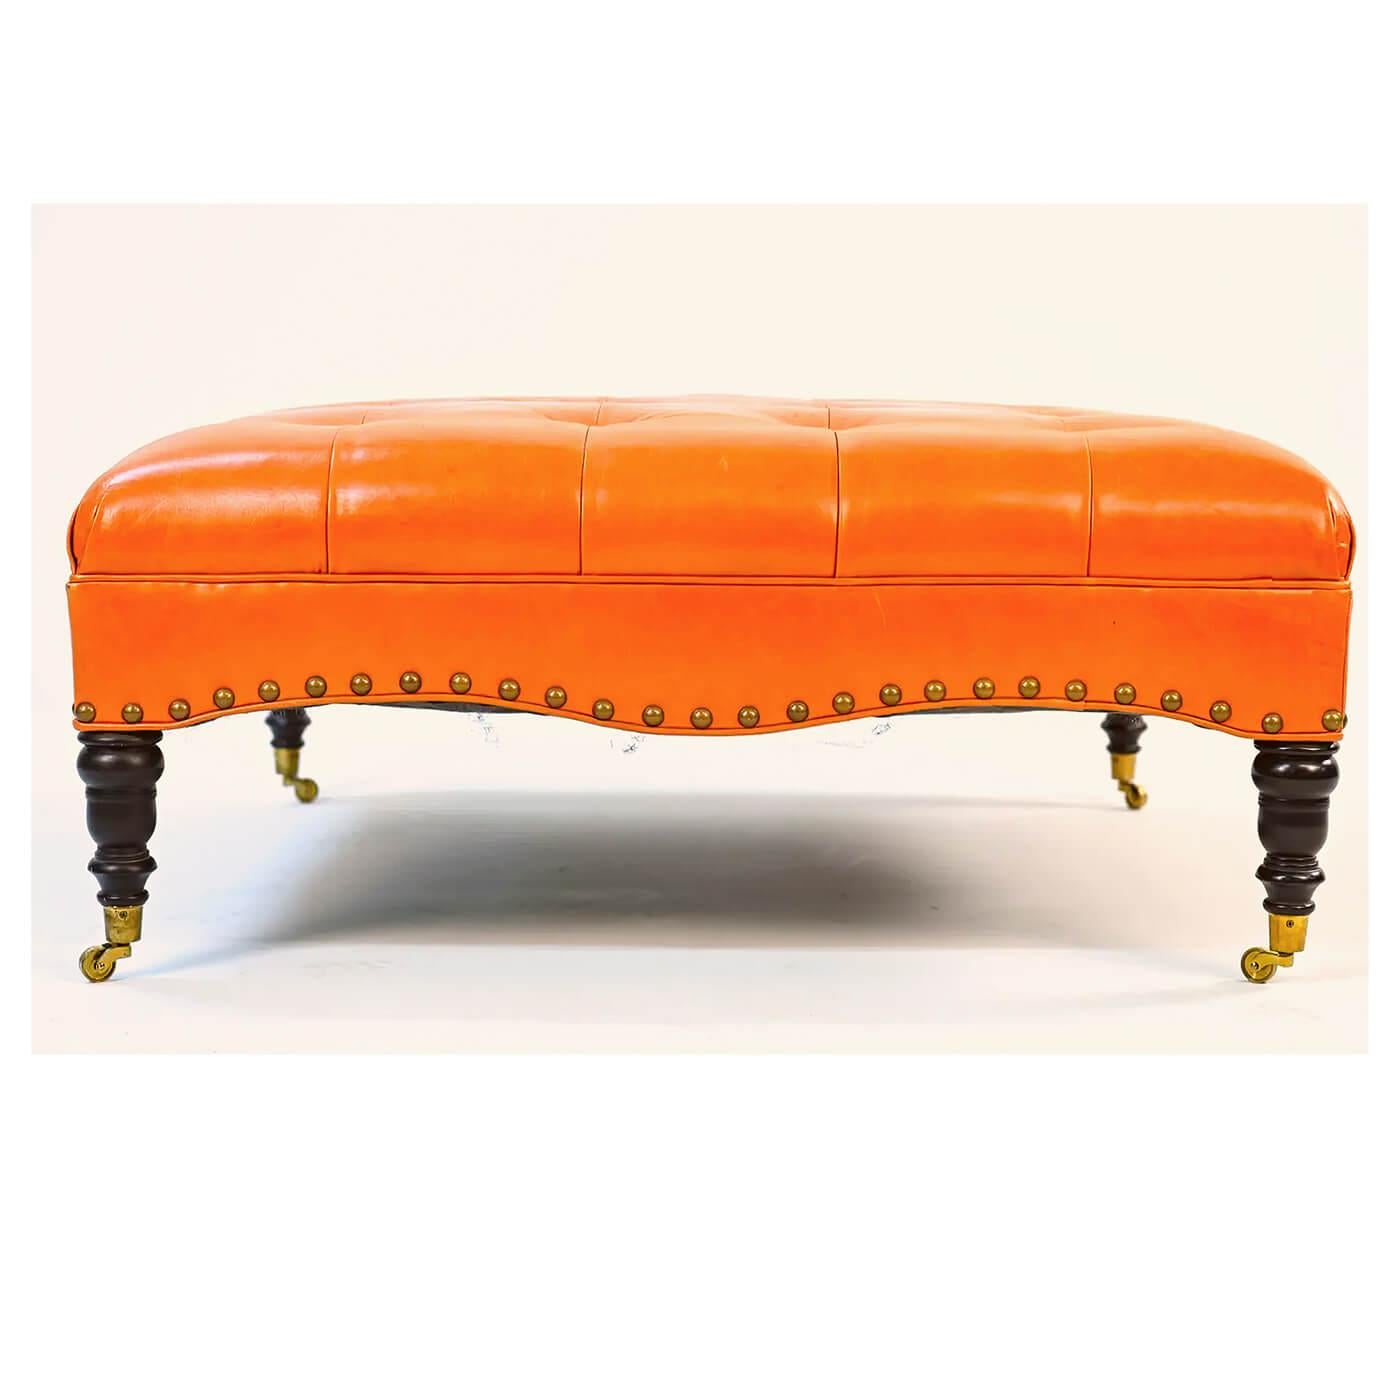 American Classical Large Classic Tufted Leather Ottoman